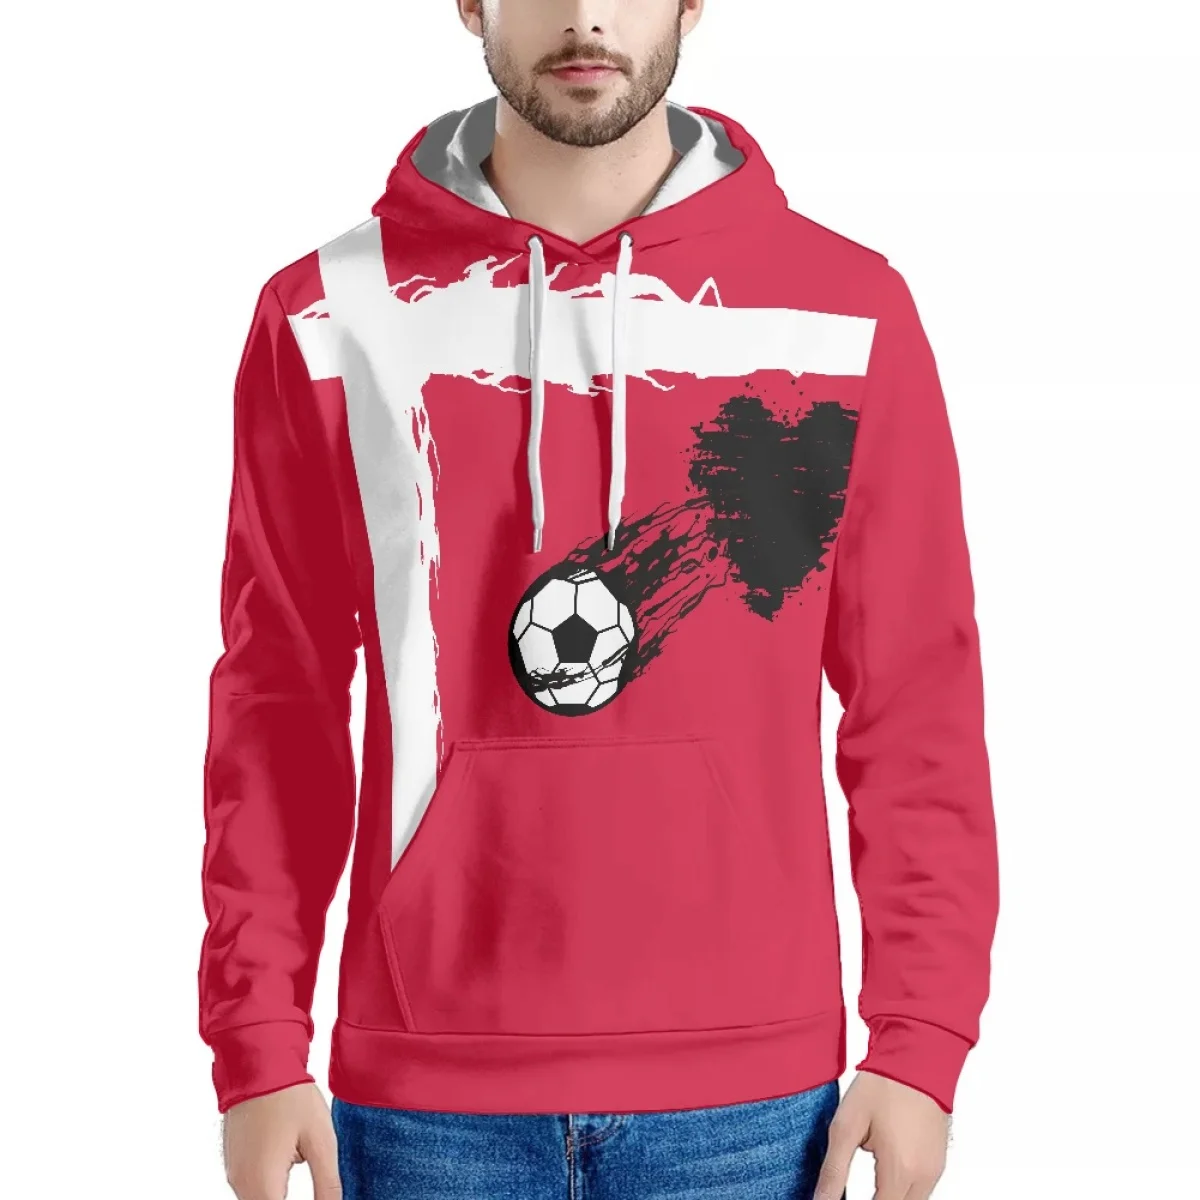 

Doginthehole Denmark Flag Printing Loose Hoodies for Men 2022 Football Pattern Hoody Pullovers Male Oversized Sweatshirt Autumn